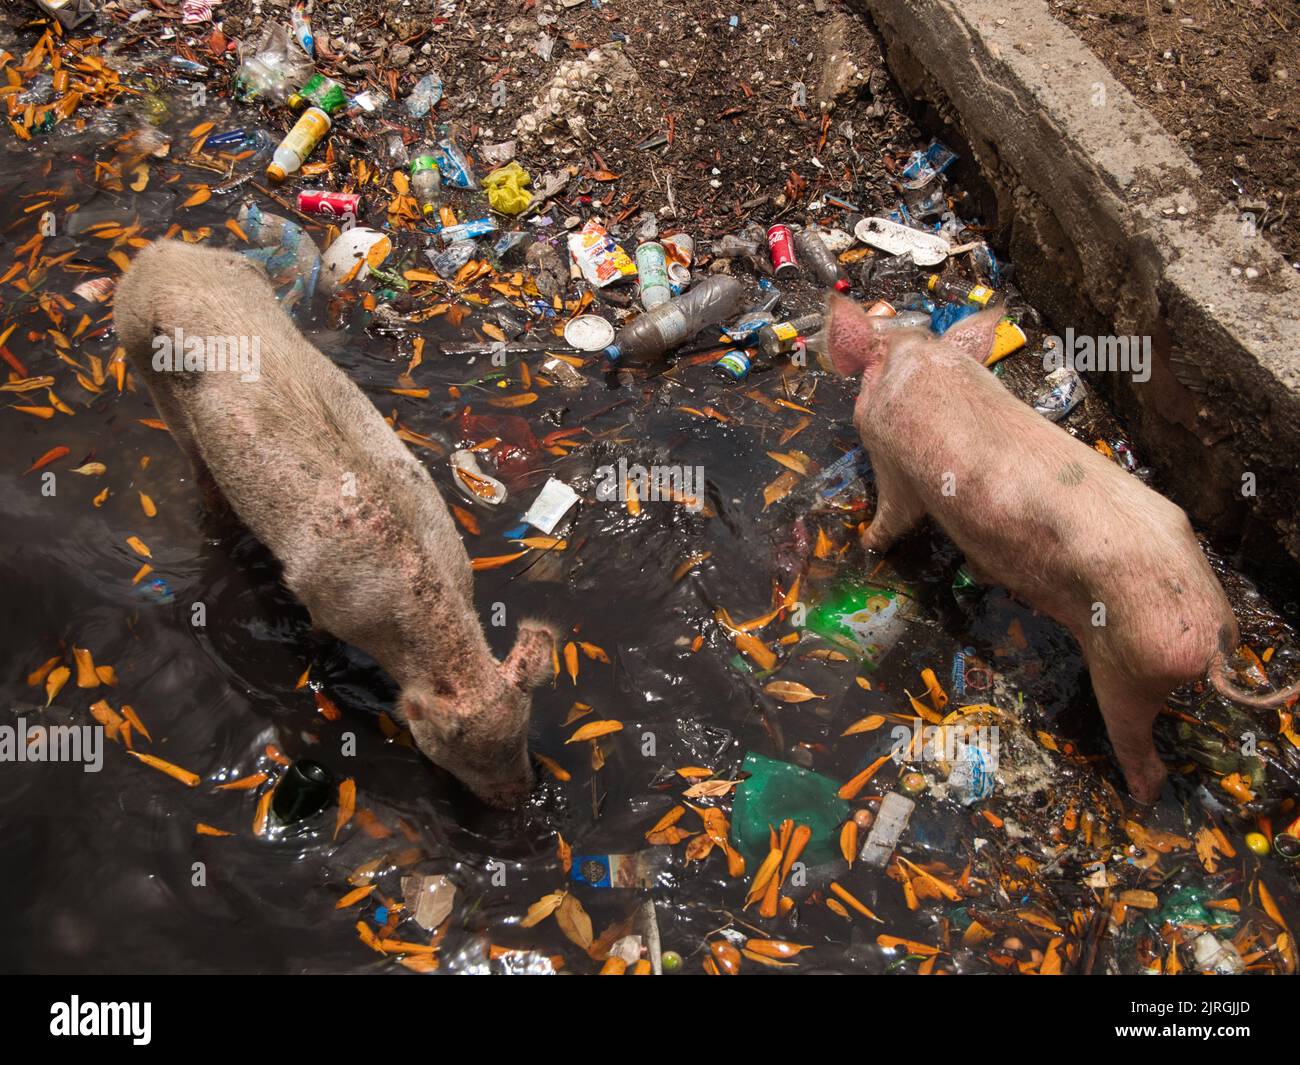 Two pigs romping in the garbage and water at the Fadiouth island, Senegal. Stock Photo